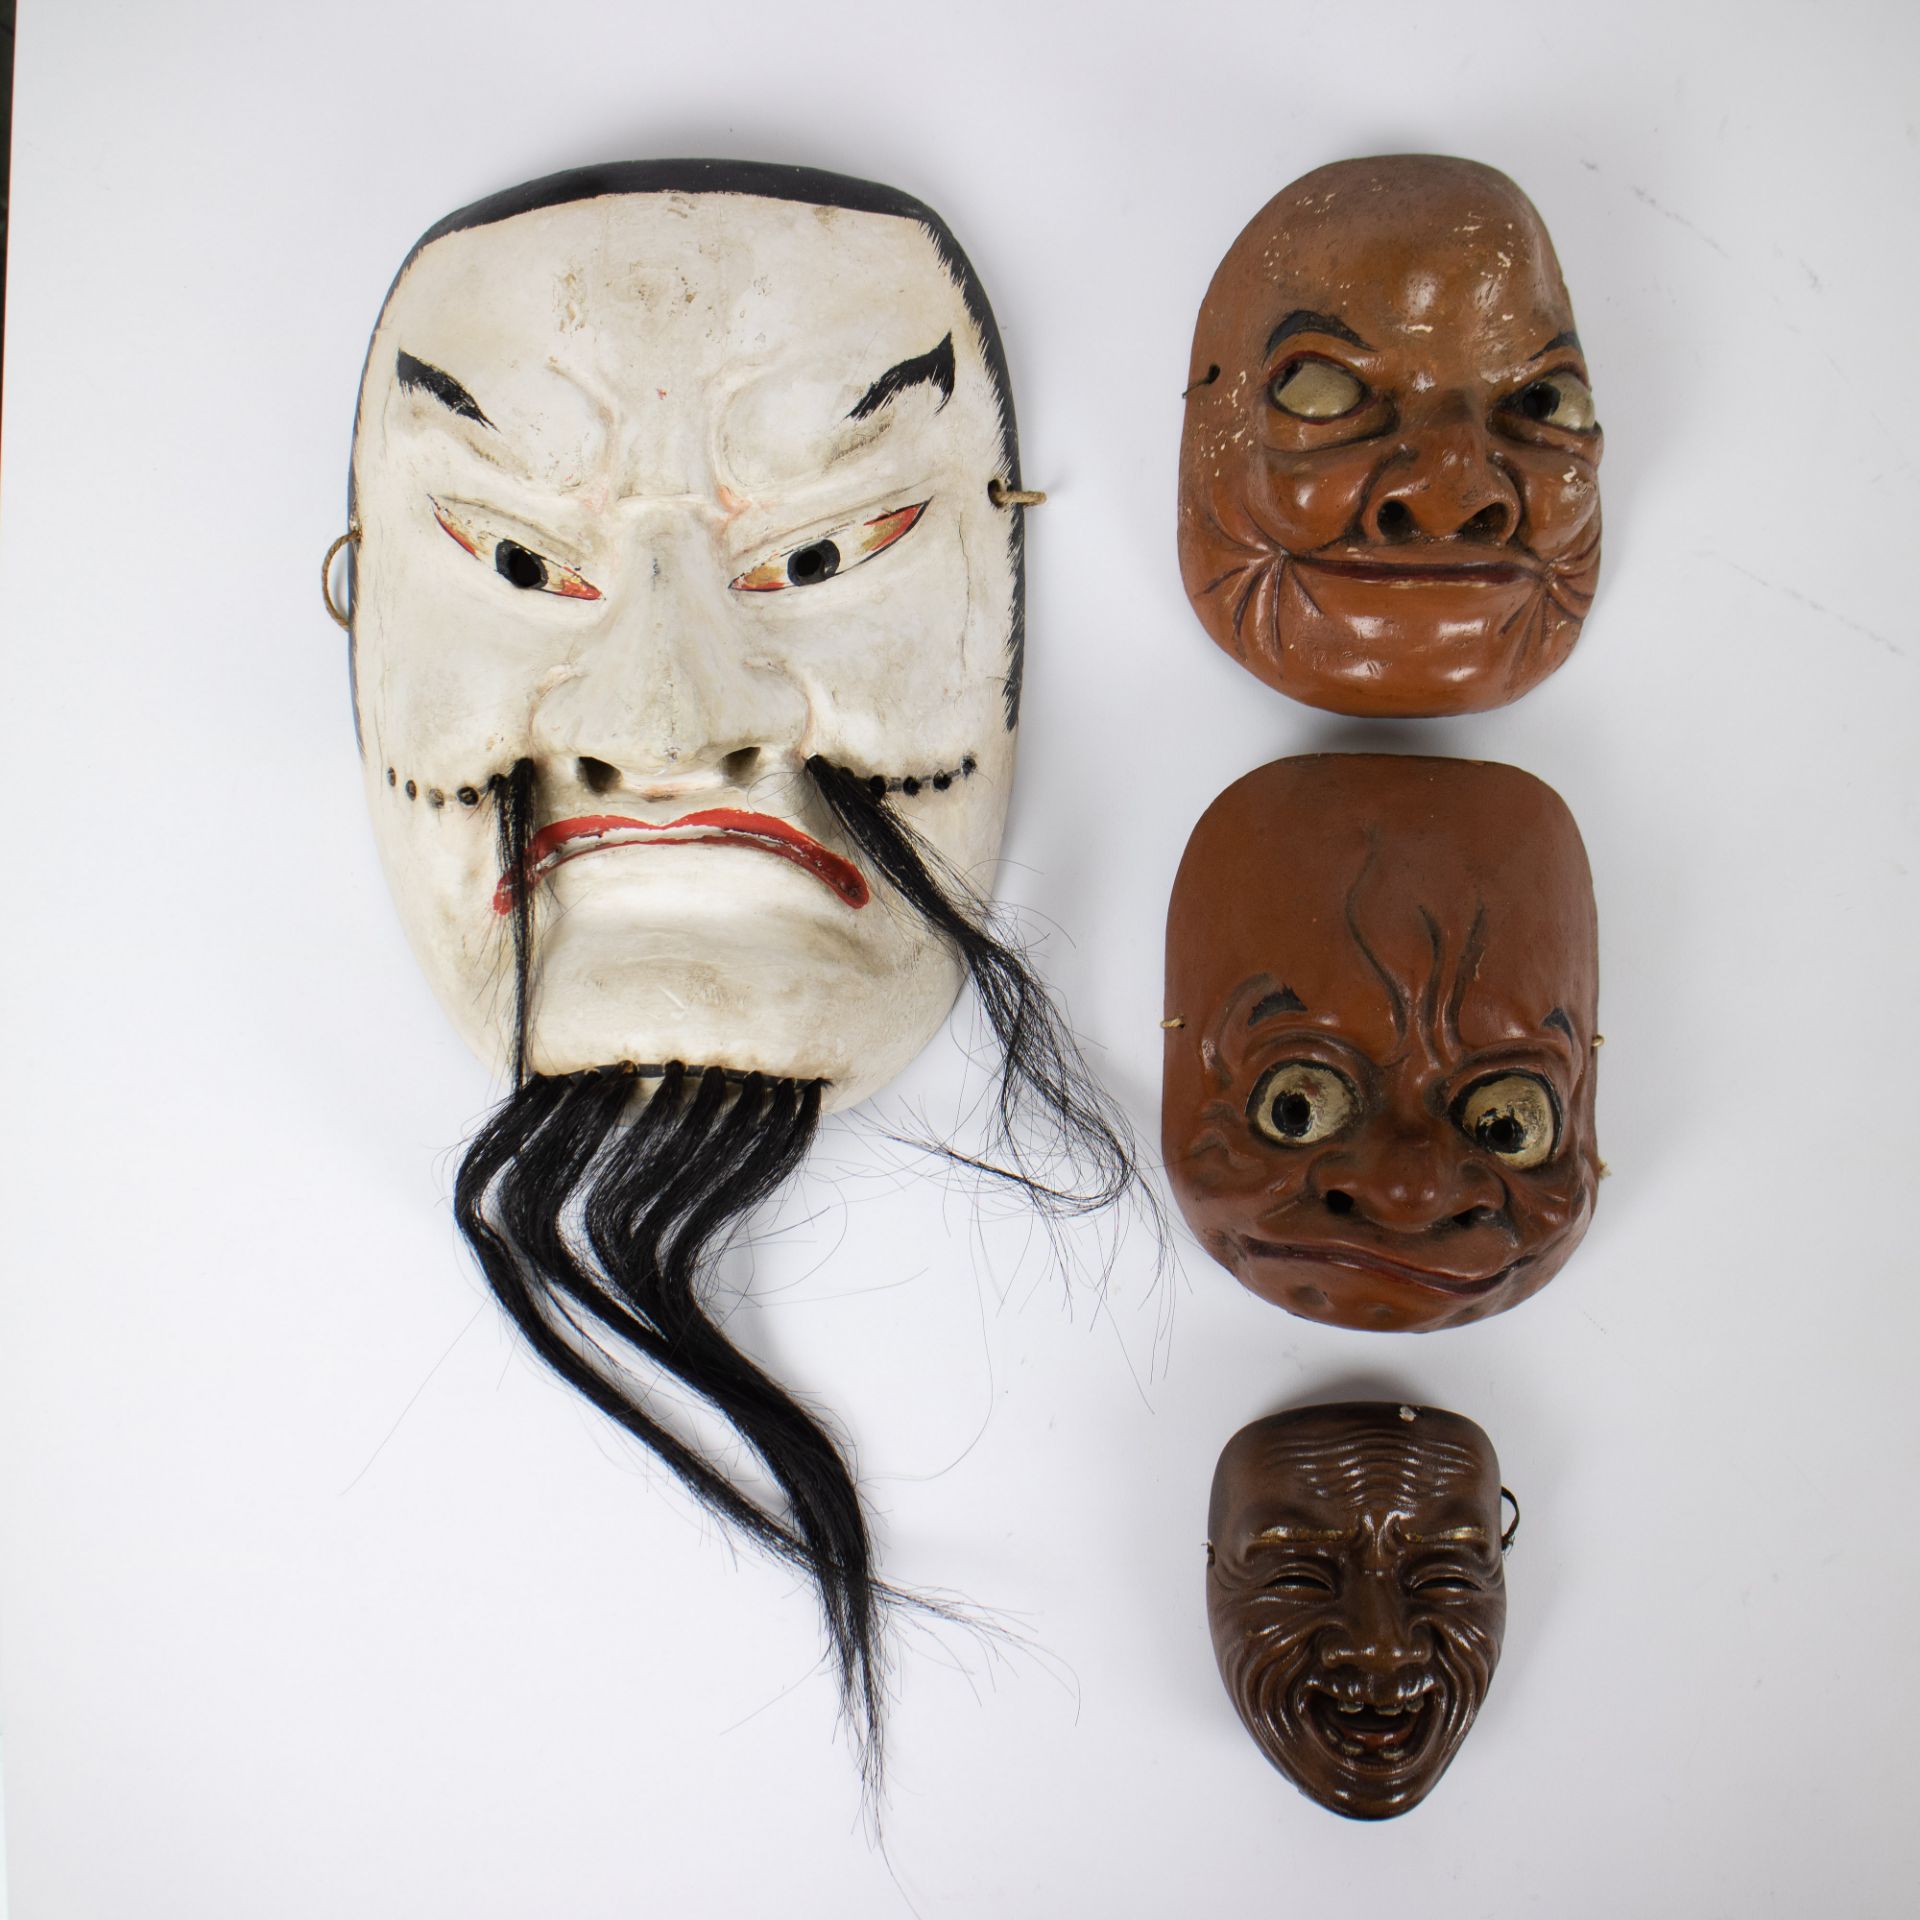 A collection of Japanese Noh masks